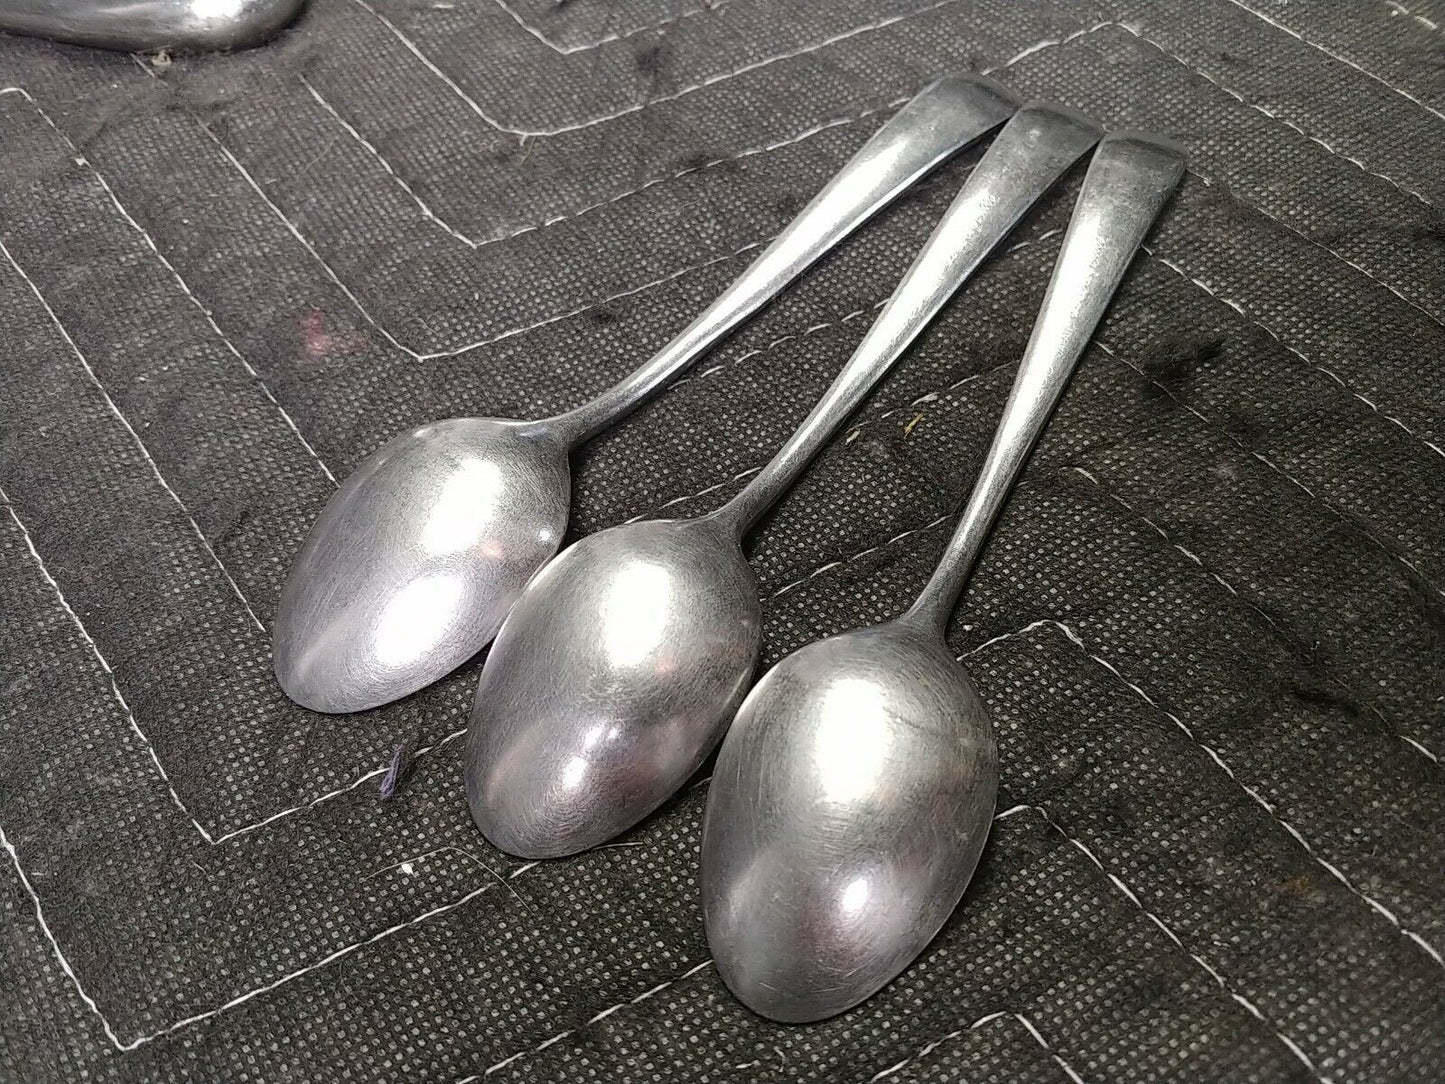 Towle Supreme Liberty Belle SCC Stainless Dinner Spoons 3pcs